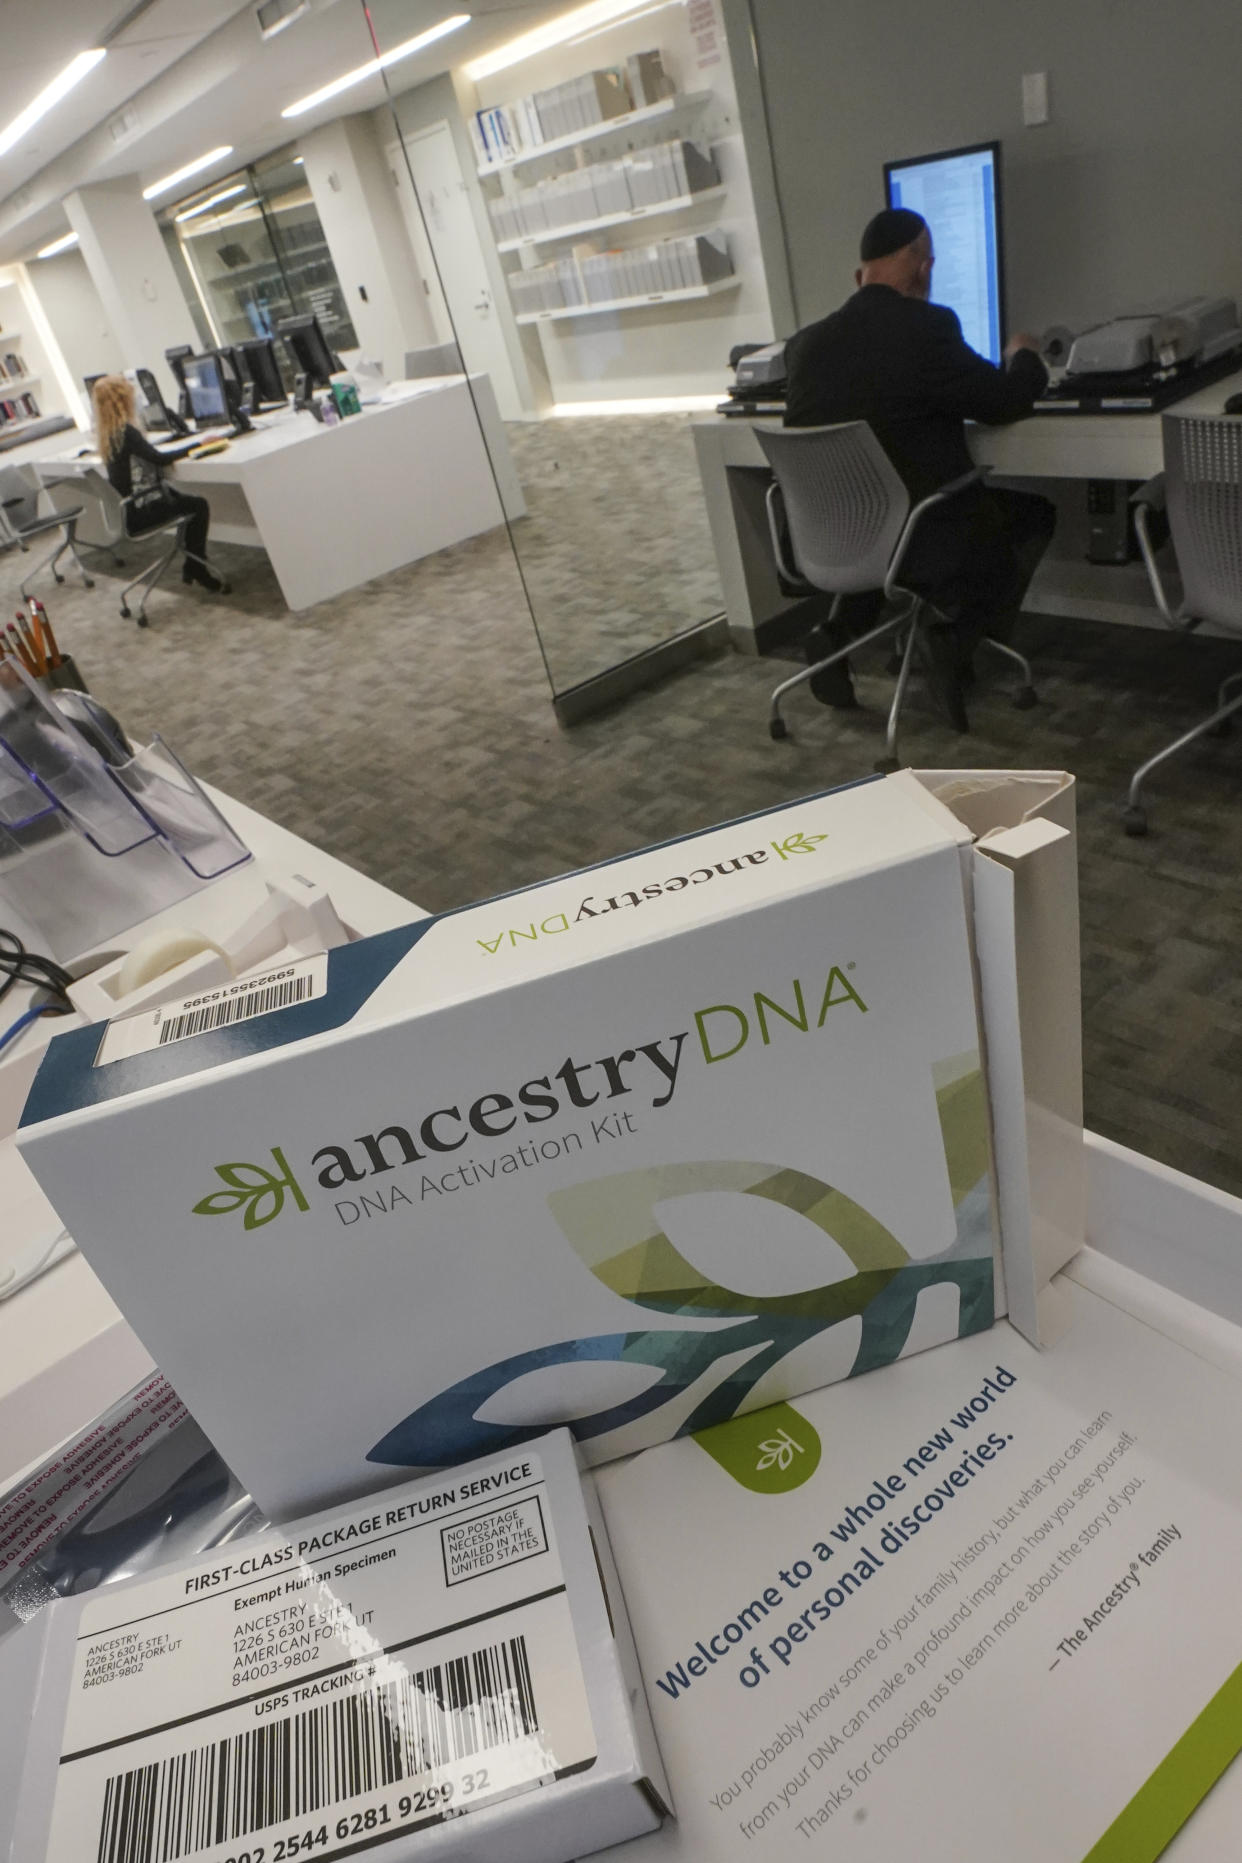 A genealogy testing kit for Ancestry/DNA is displayed in the Ackman and Ziff Family Genealogy Institute research area at the Center for Jewish History (CJH), Tuesday Nov. 29, 2022, in New York. CJH is launching a project offering the DNA testing kits for free to Holocaust survivors and their children to help increase the possibly of finding family connections torn apart in World War II. (AP Photo/Bebeto Matthews)